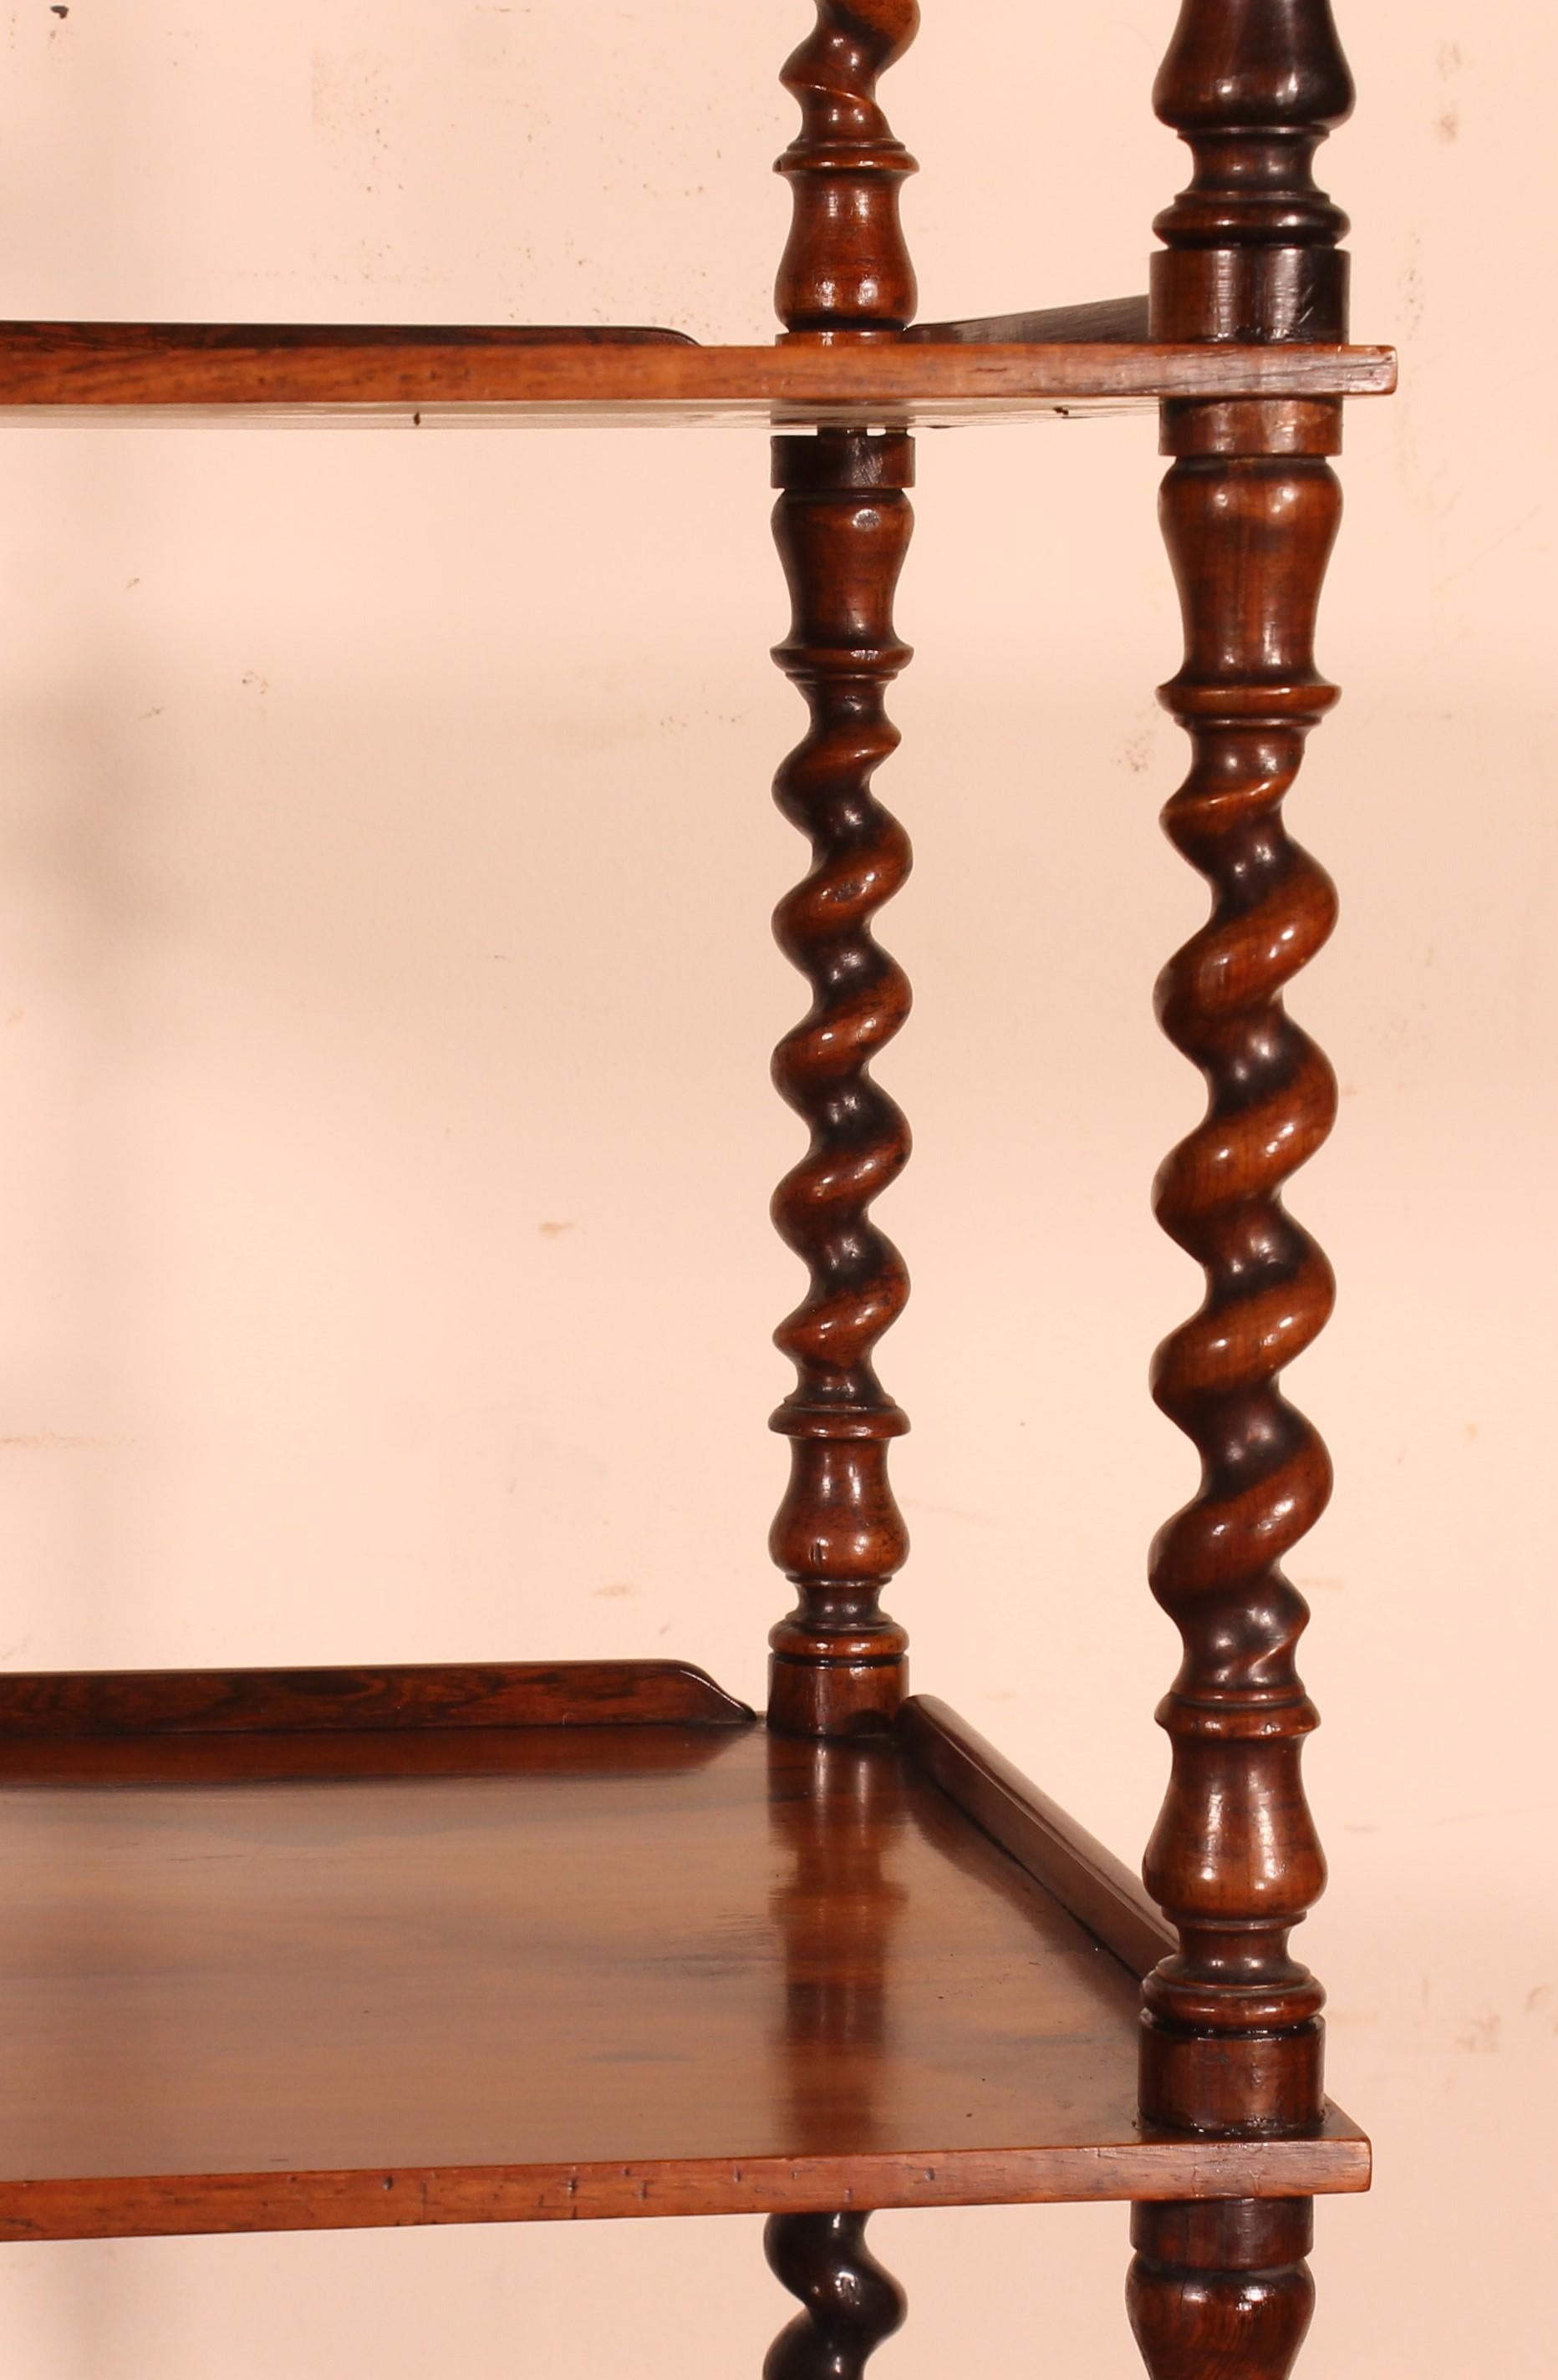 British Rosewood Whatnot or Shelf from 19th Century, England